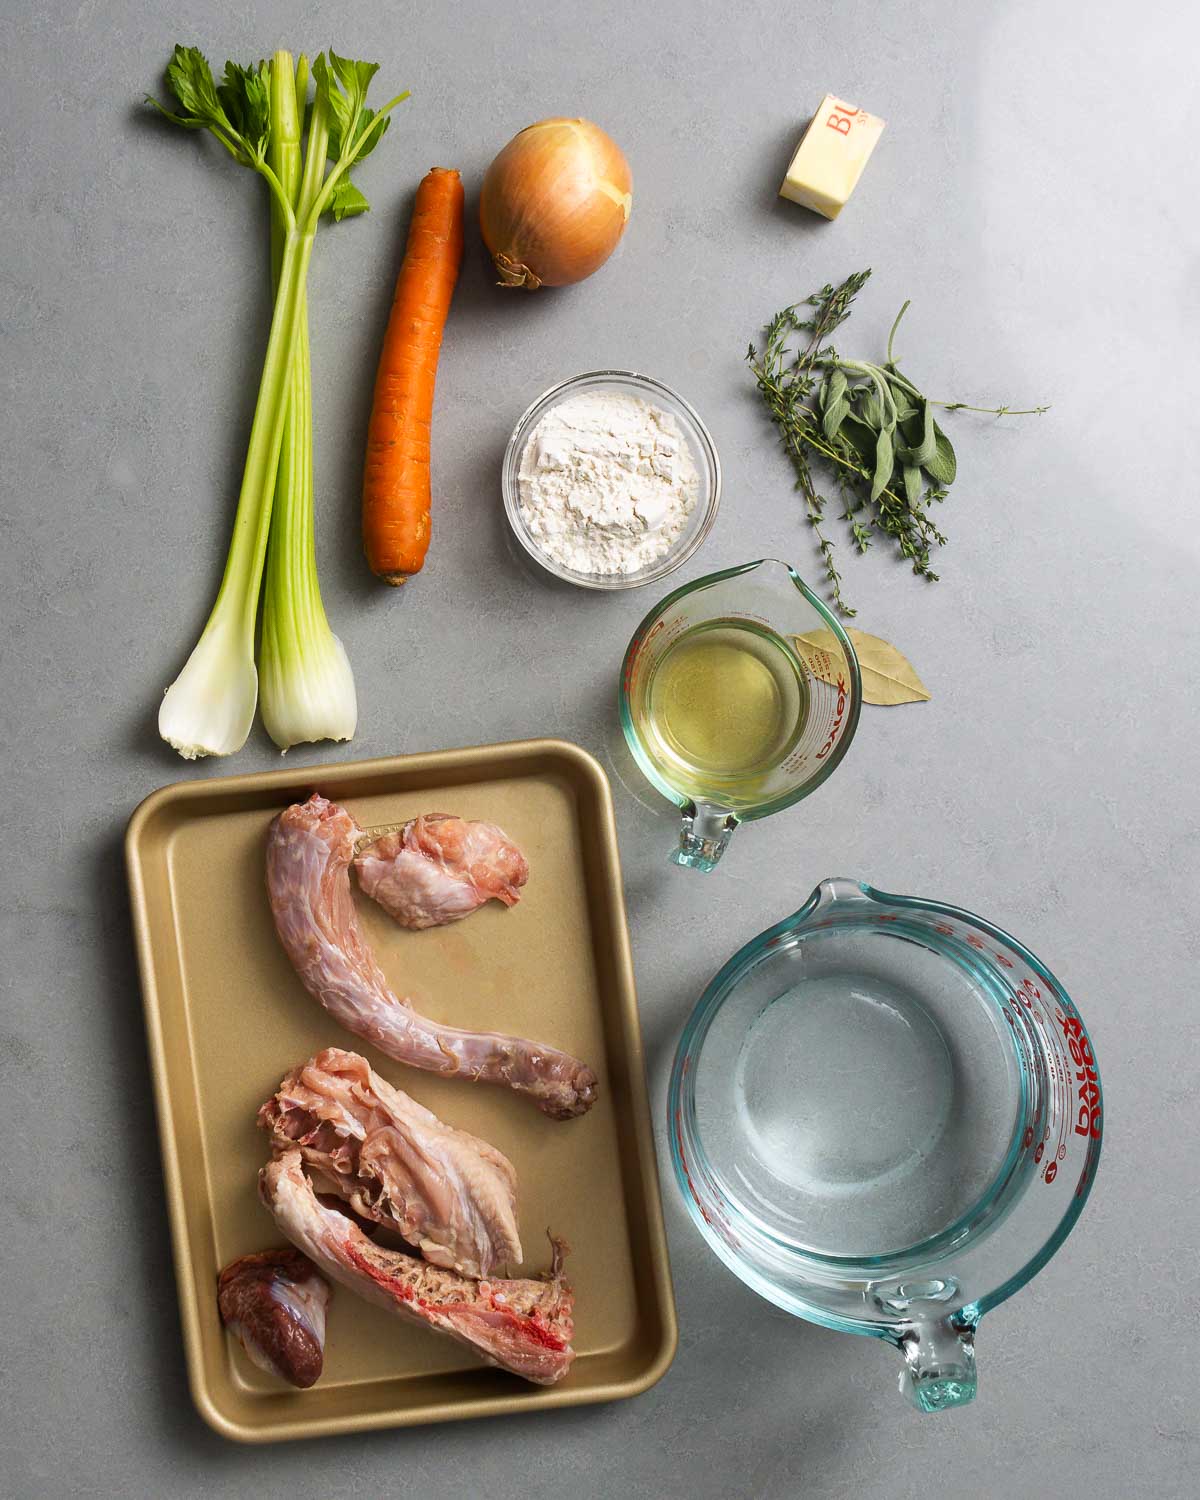 Ingredients shown: celery, carrot, onion, flour, butter, thyme, sage, bay leaf, white wine, turkey parts and giblets, and water.